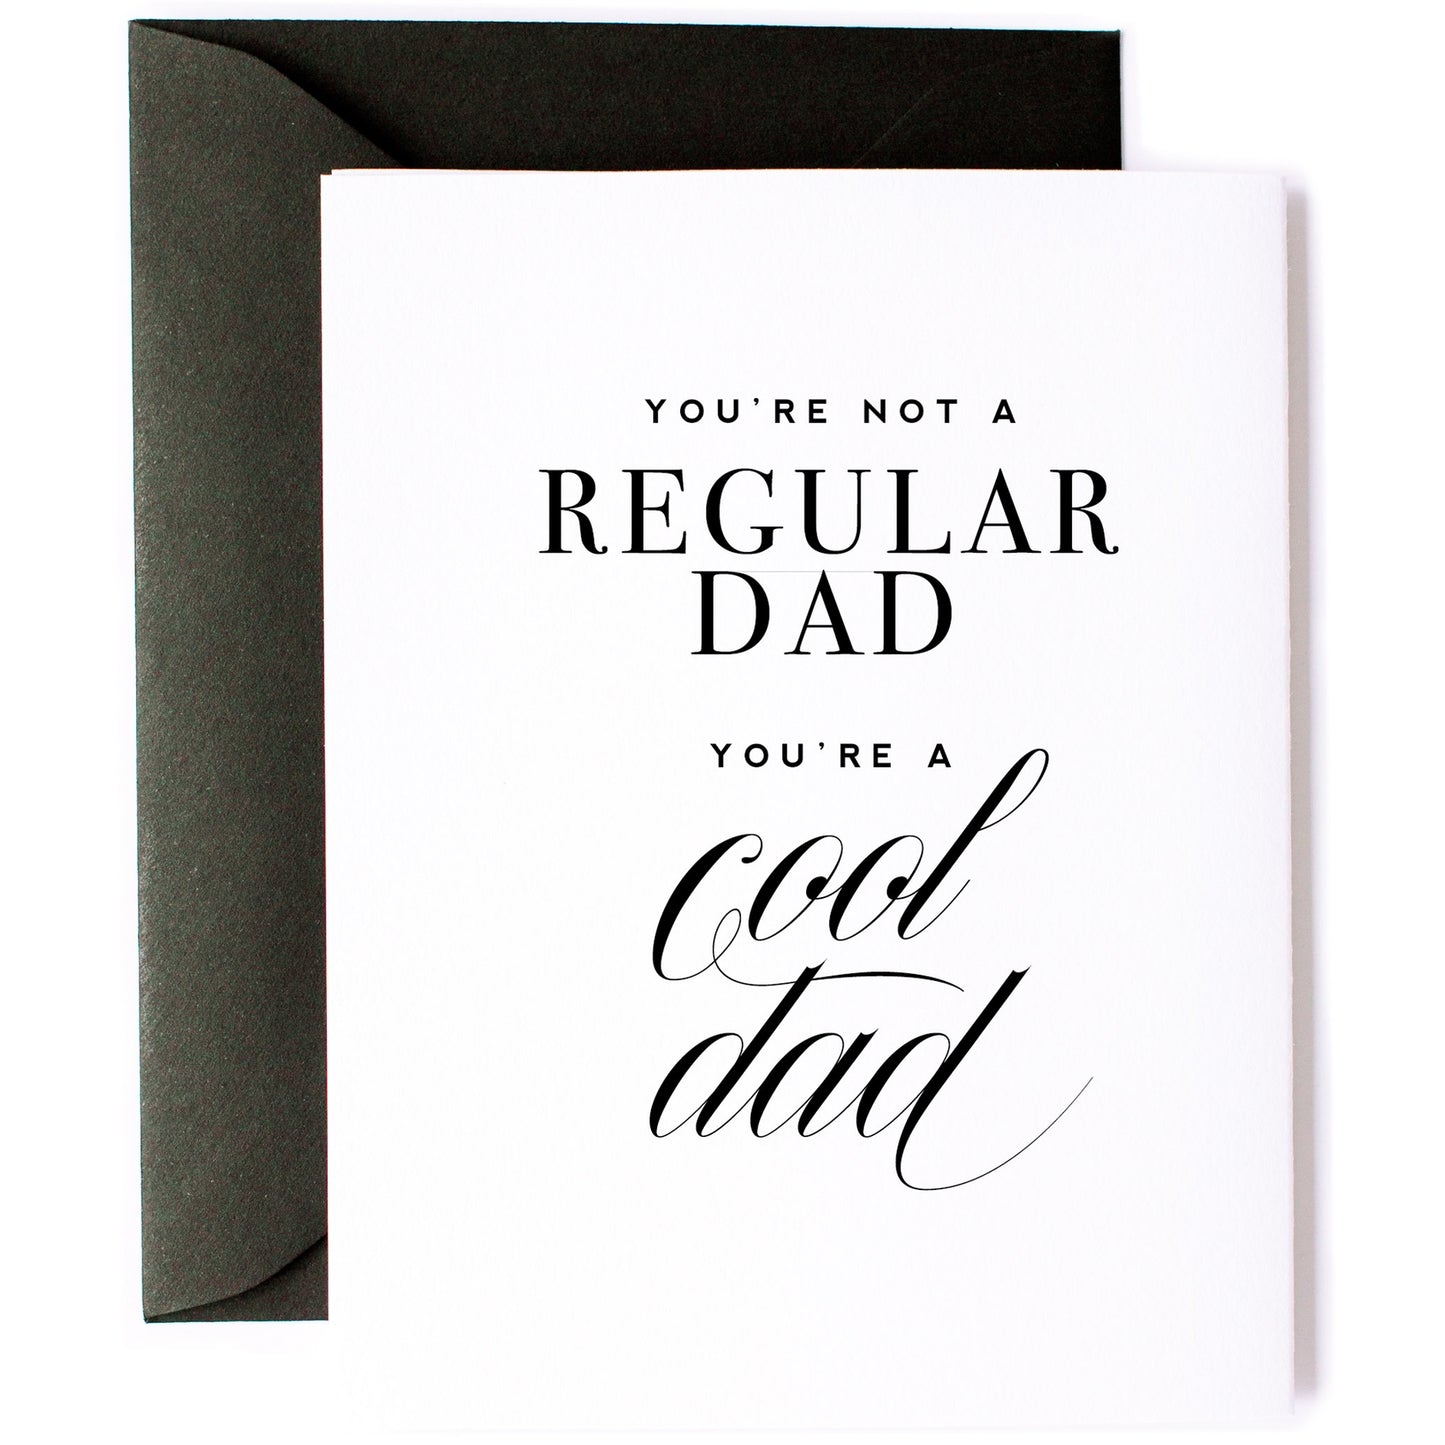 Cool Dad - Funny Father's Day Card